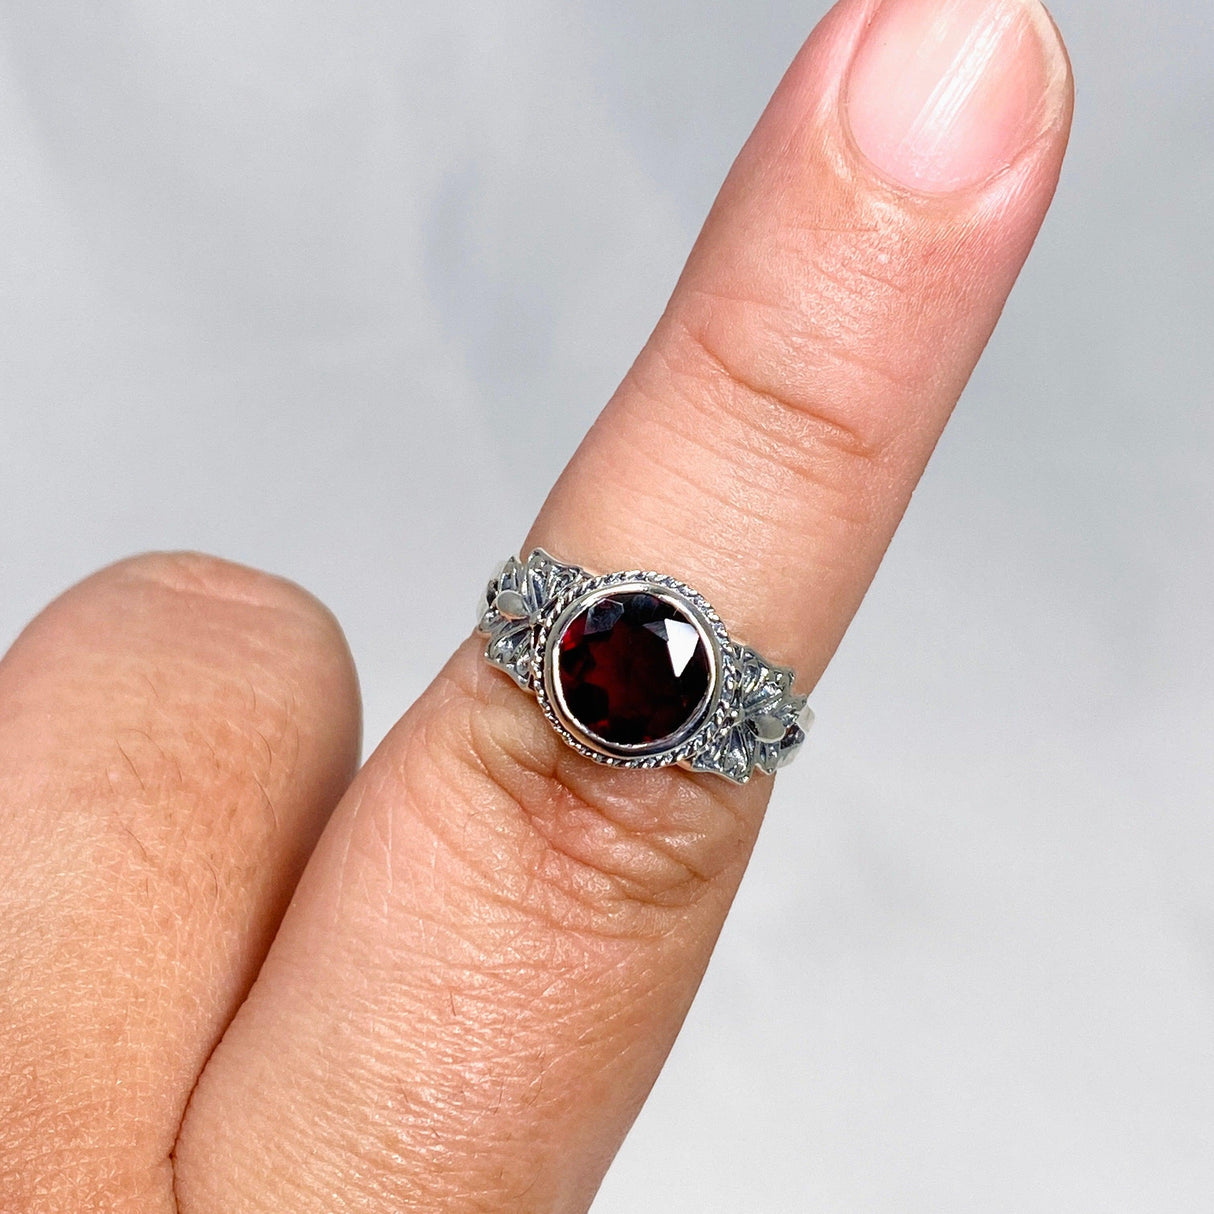 Garnet Faceted Round Ring in a Decorative Setting R3671 - Nature's Magick